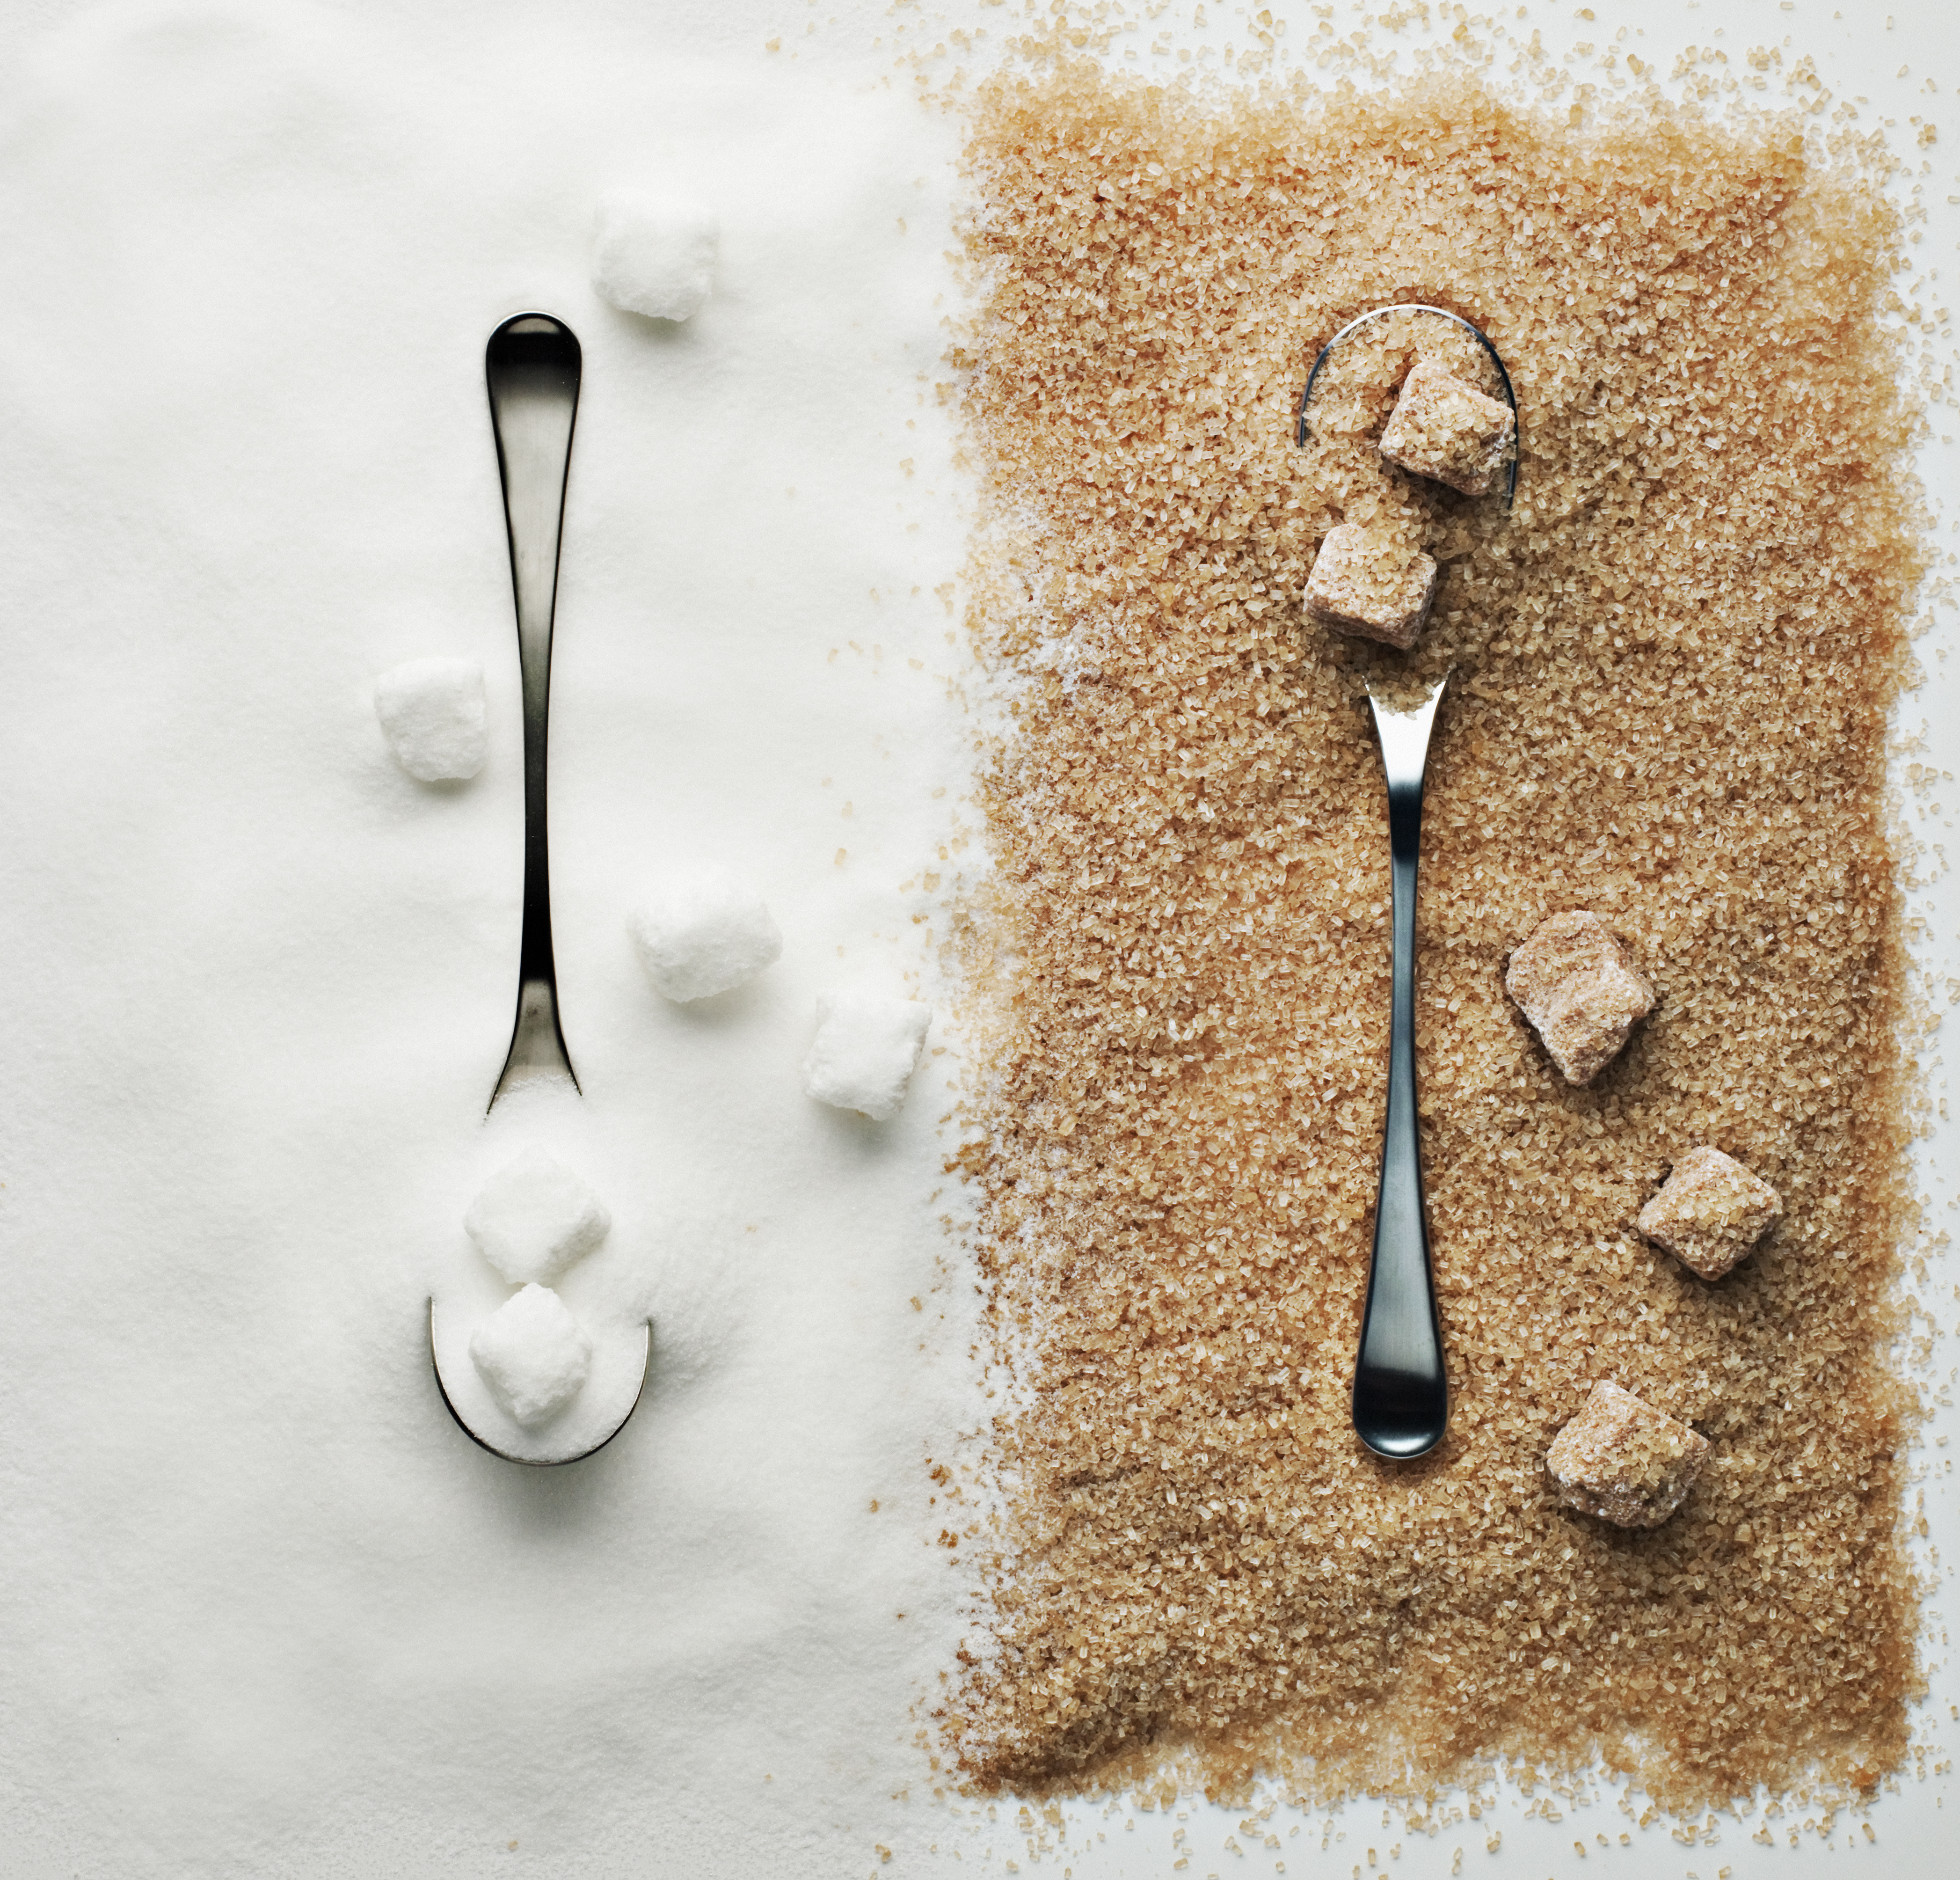 What are refined sugars and in what kinds of foods are they found?